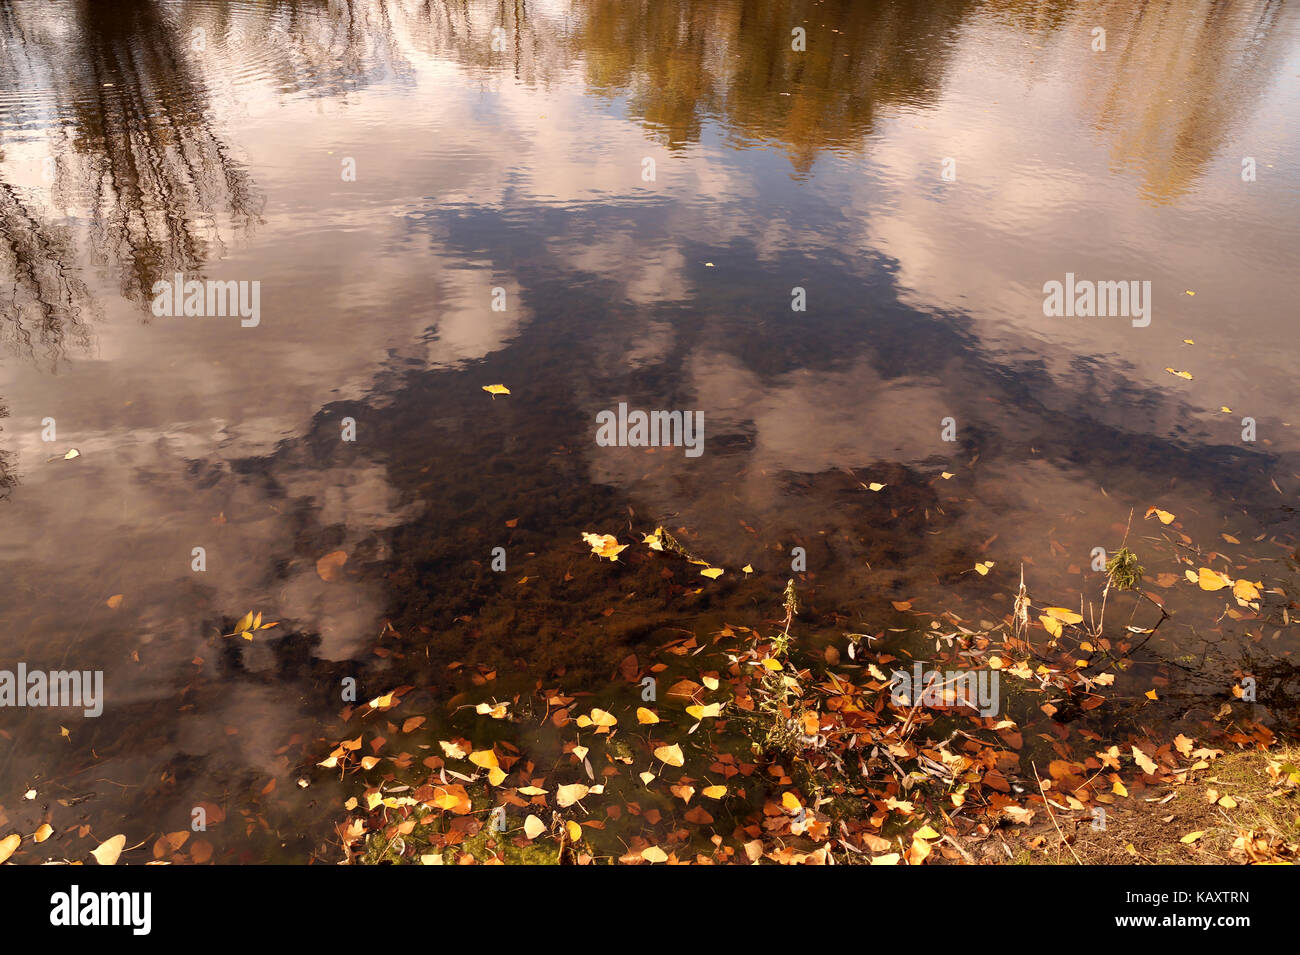 Autumn etude with the fallen-down yellow leaves on a water smooth surfacea Stock Photo